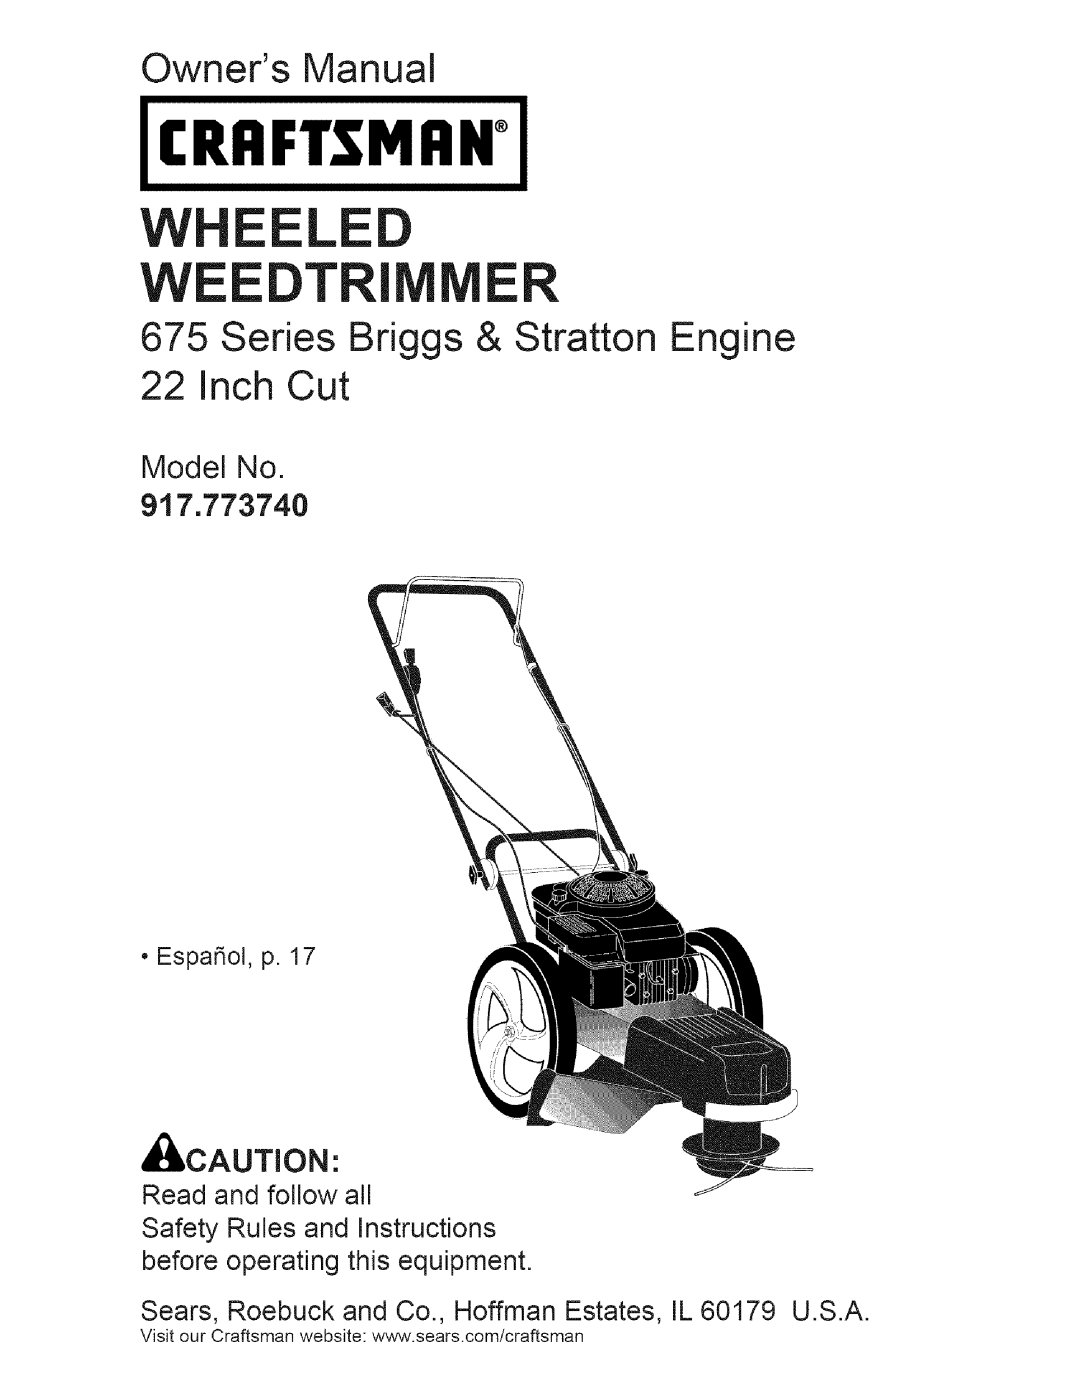 Craftsman owner manual Owners Manual, Series Briggs & Stratton Engine 22 Inch Cut, Model No, 917.773740, _ICAUTiON 